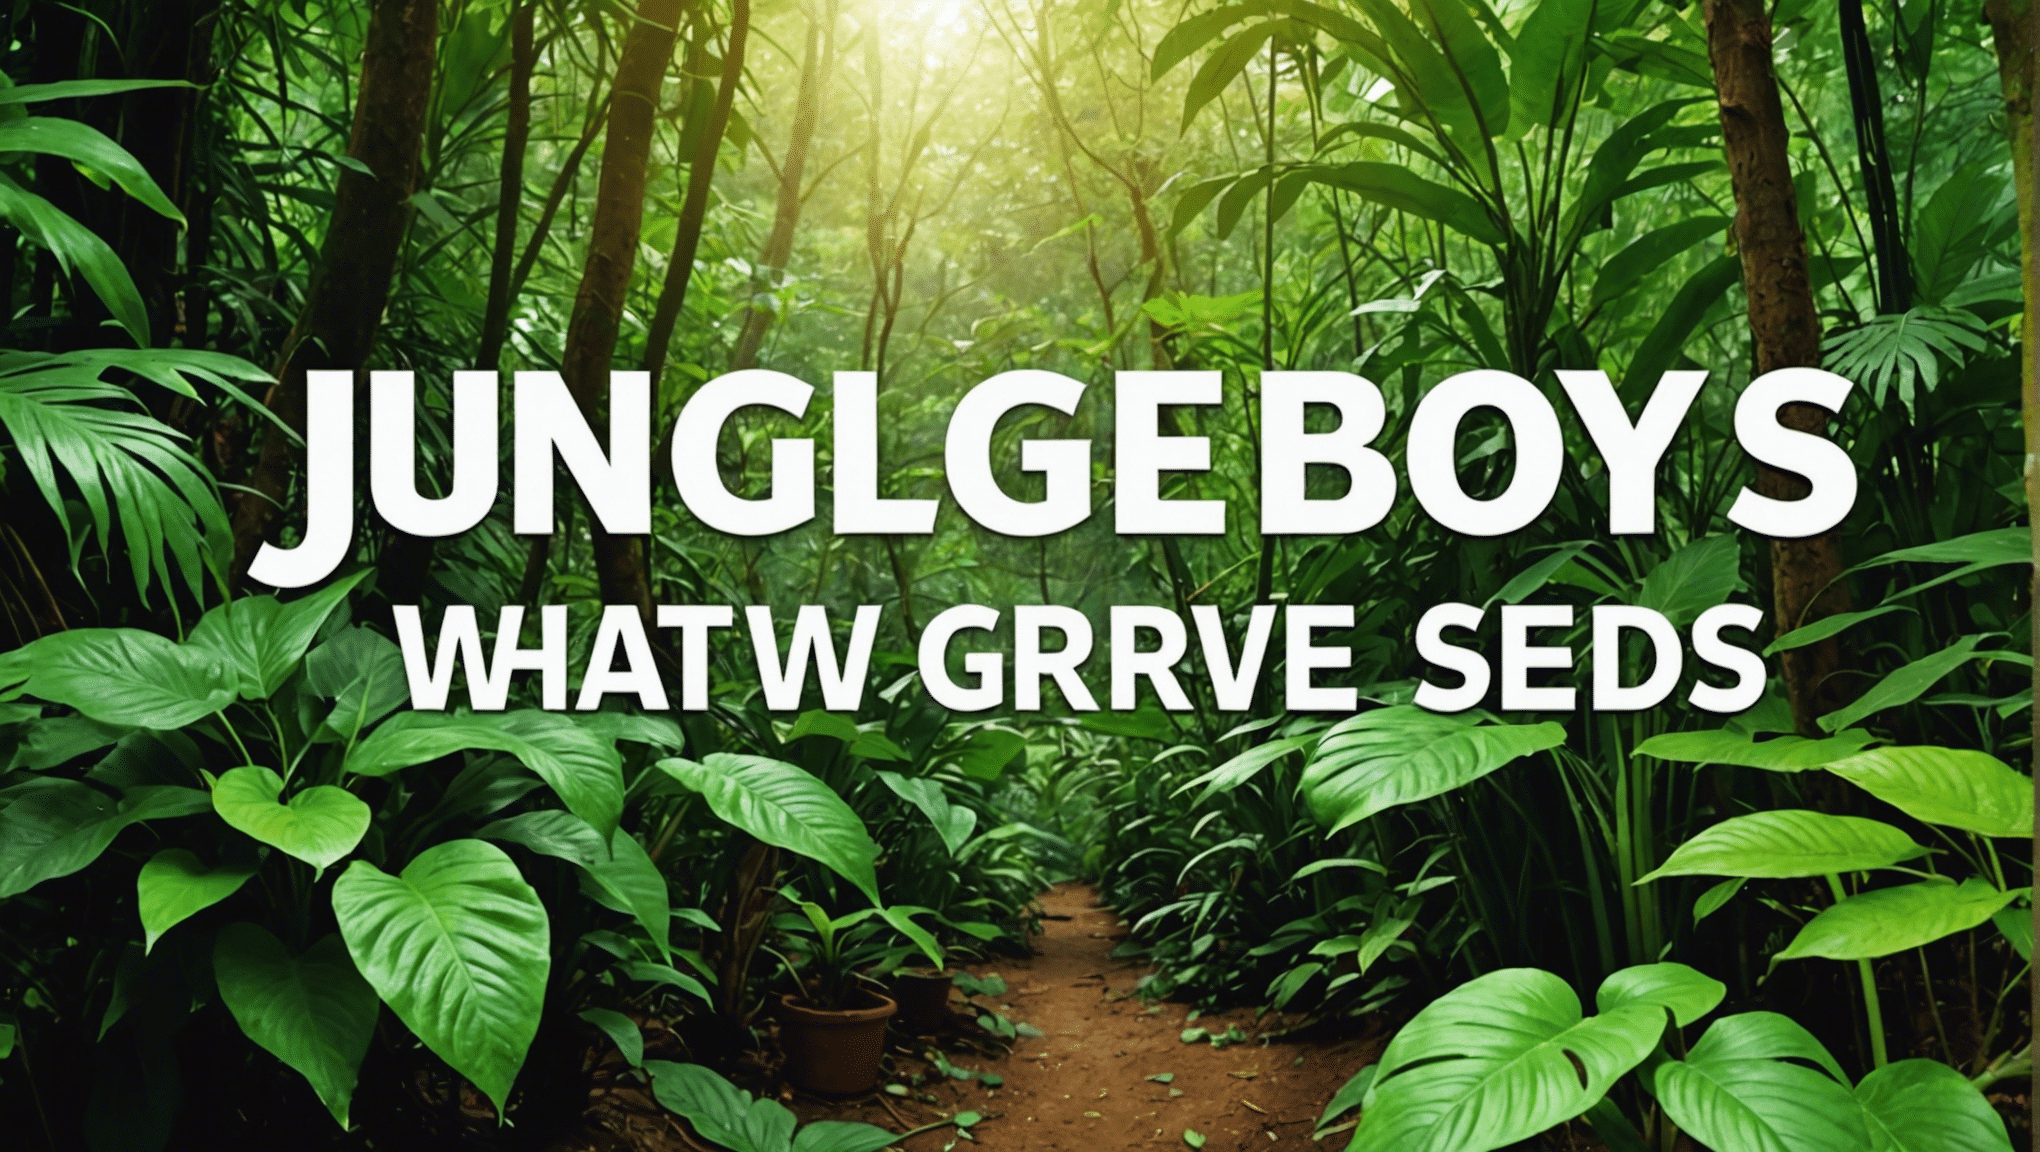 discover the significance of jungle boys seeds and their growth process in this comprehensive guide. learn about the unique characteristics and cultivation techniques of jungle boys seeds.